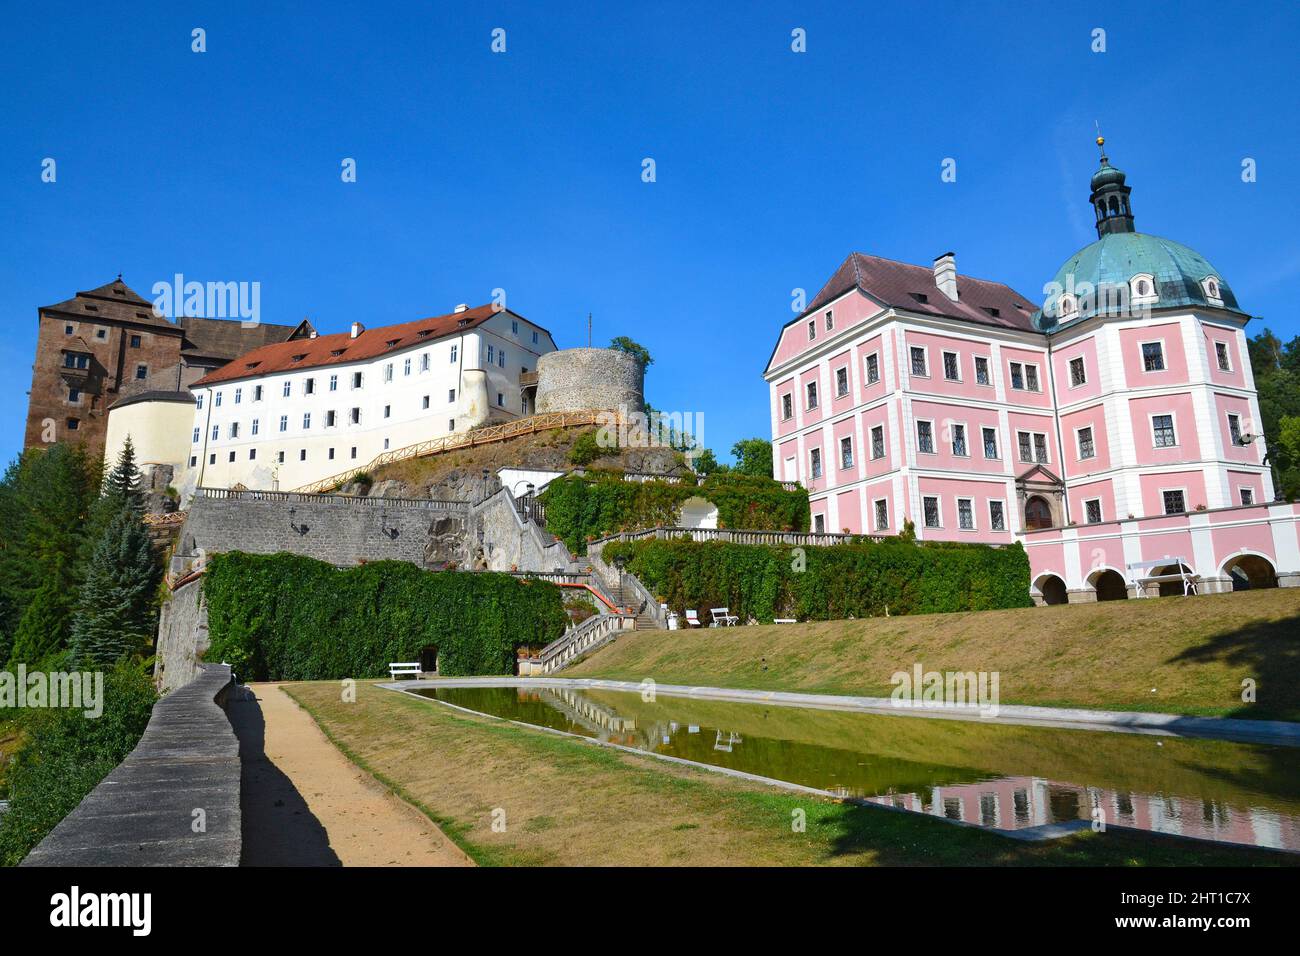 Becov nad Teplou, Czech Republic - August 12, 2018: Beautiful baroque chateau and gothic castle with gardens in the ancient town of Becov nad Teplou n Stock Photo